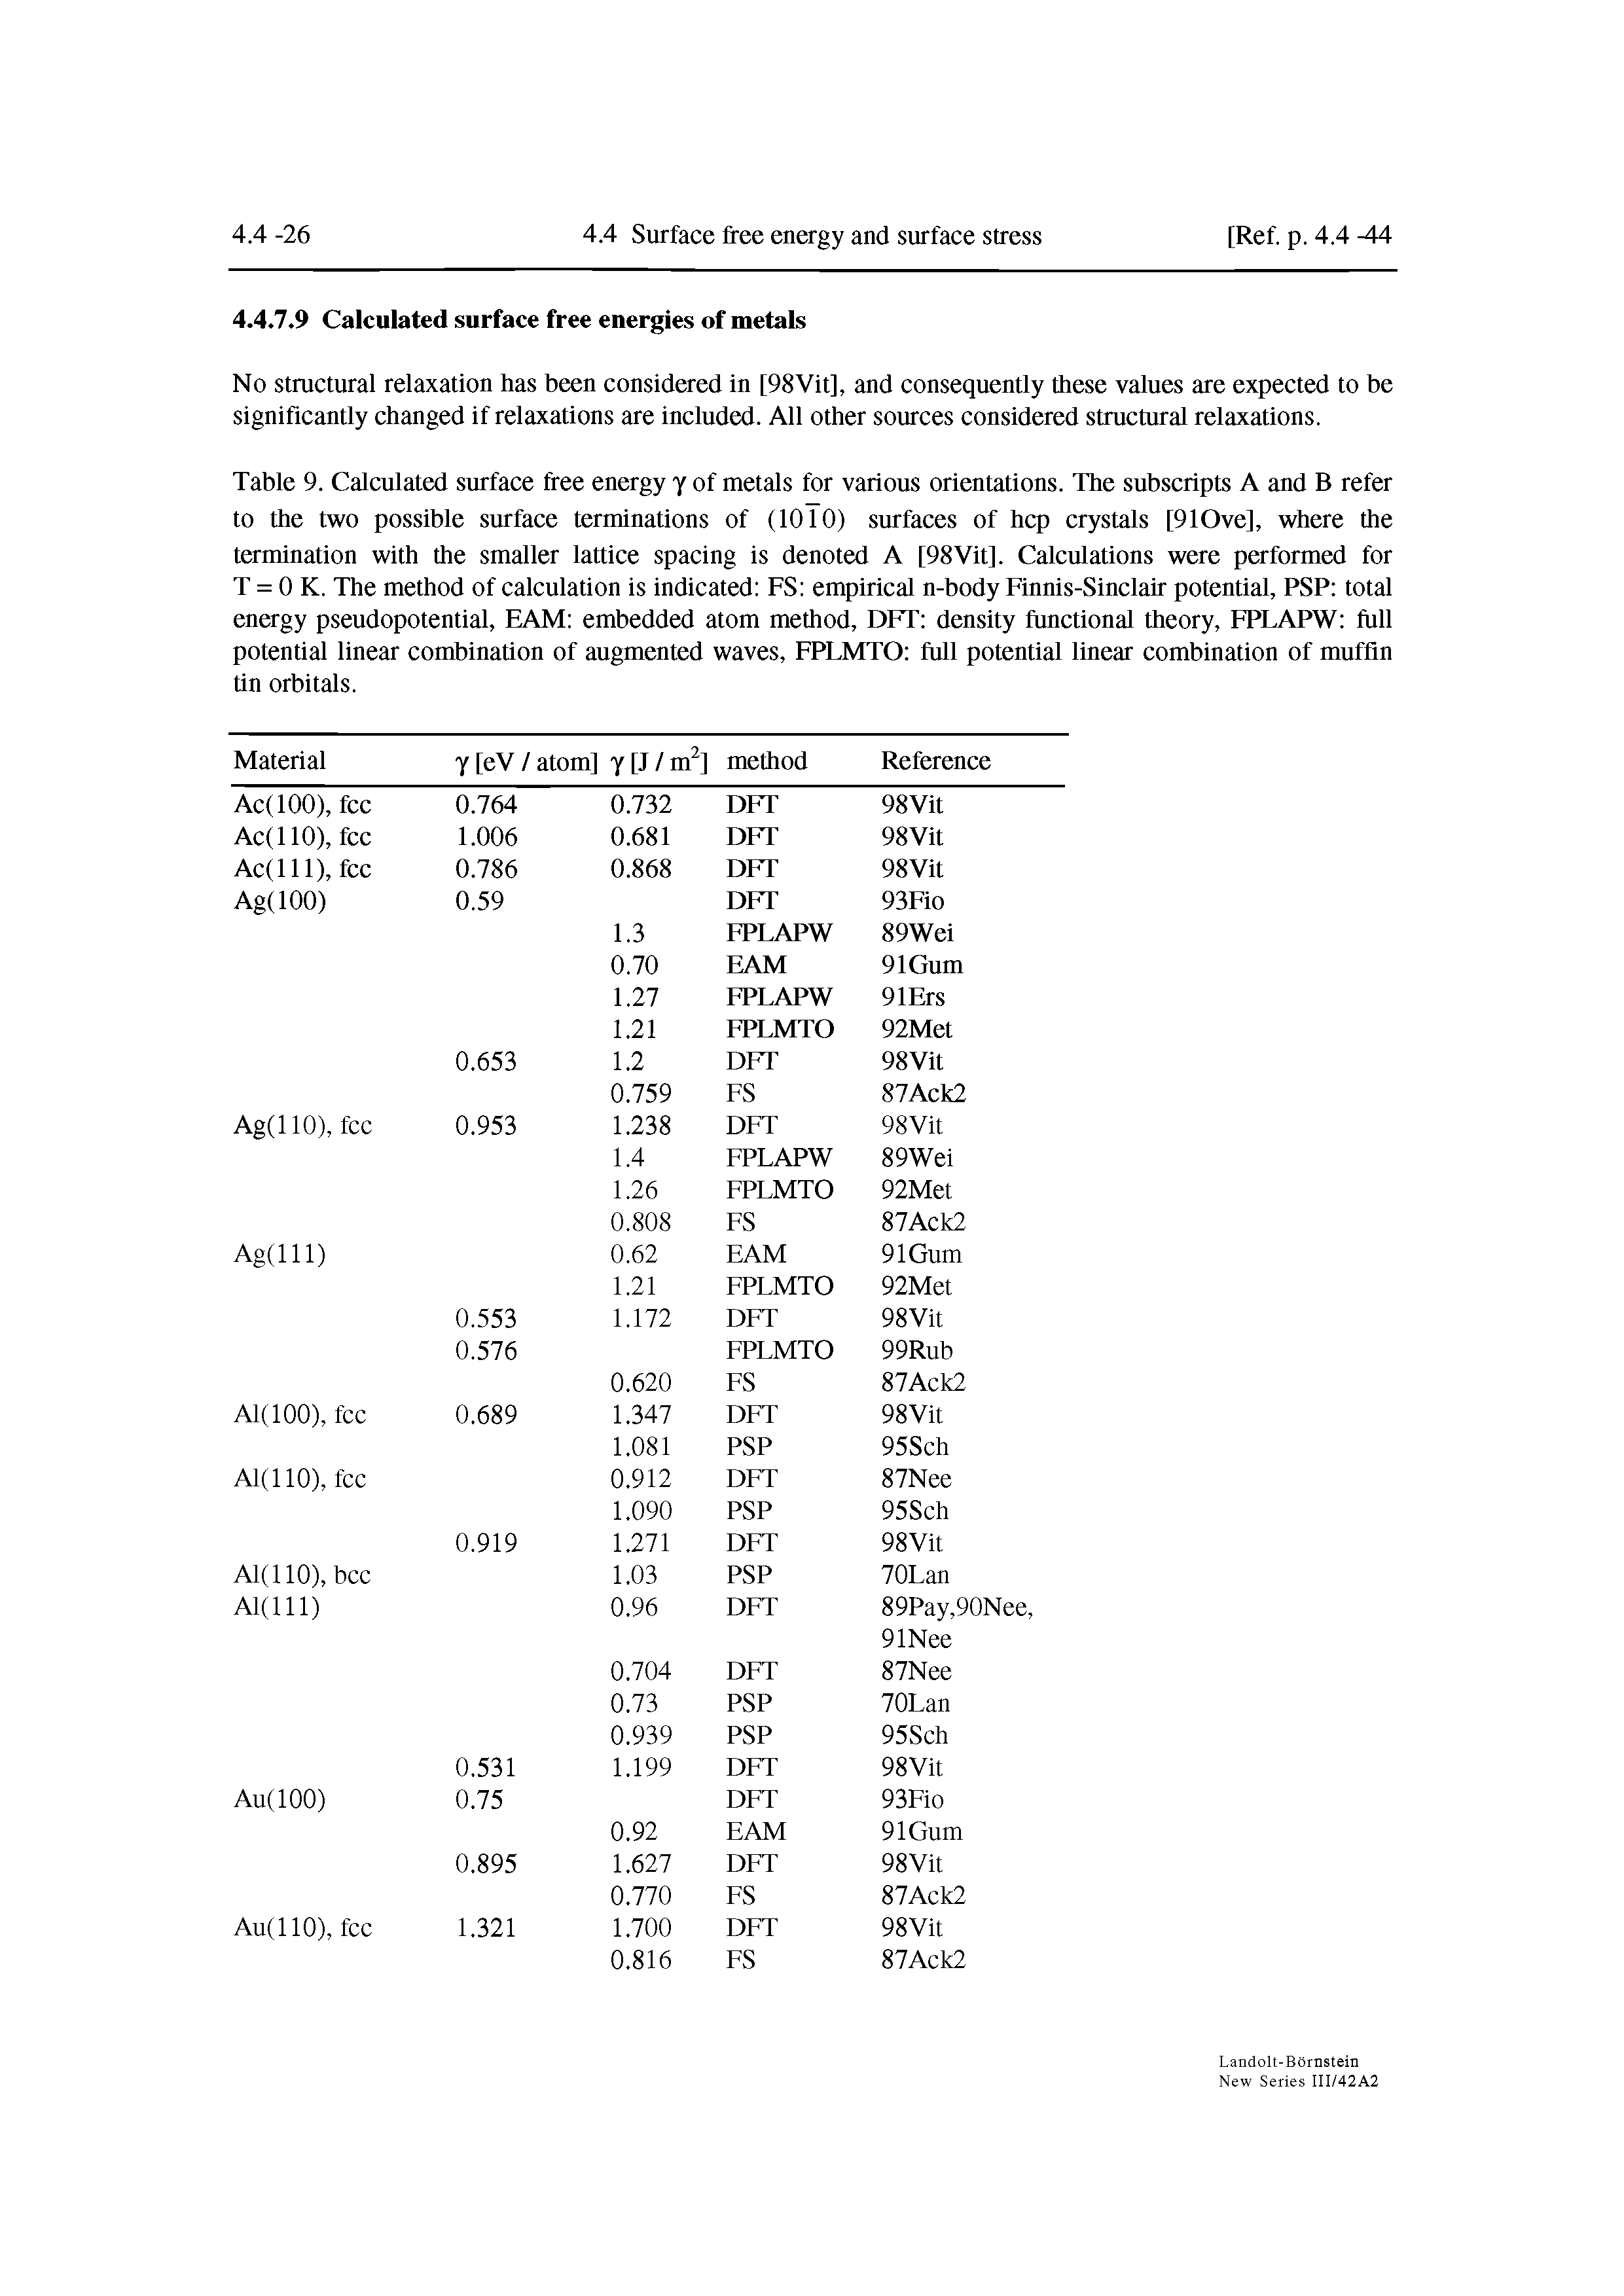 Table 9. Calculated surface free energy y of metals for various orientations. The subscripts A and B refer to the two possible surface terminations of (1010) surfaces of hep crystals [910ve], where the termination with the smaller lattice spacing is denoted A [98Vit]. Calculations were performed for T = 0 K. The method of calculation is indicated FS empirical n-body Finnis-Sinclair potential, PSP total energy pseudopotential, EAM embedded atom method, DFT density functional theory, FPLAPW full potential linear combination of augmented waves, FPLMTO full potential linear combination of muffin tin orbitals.